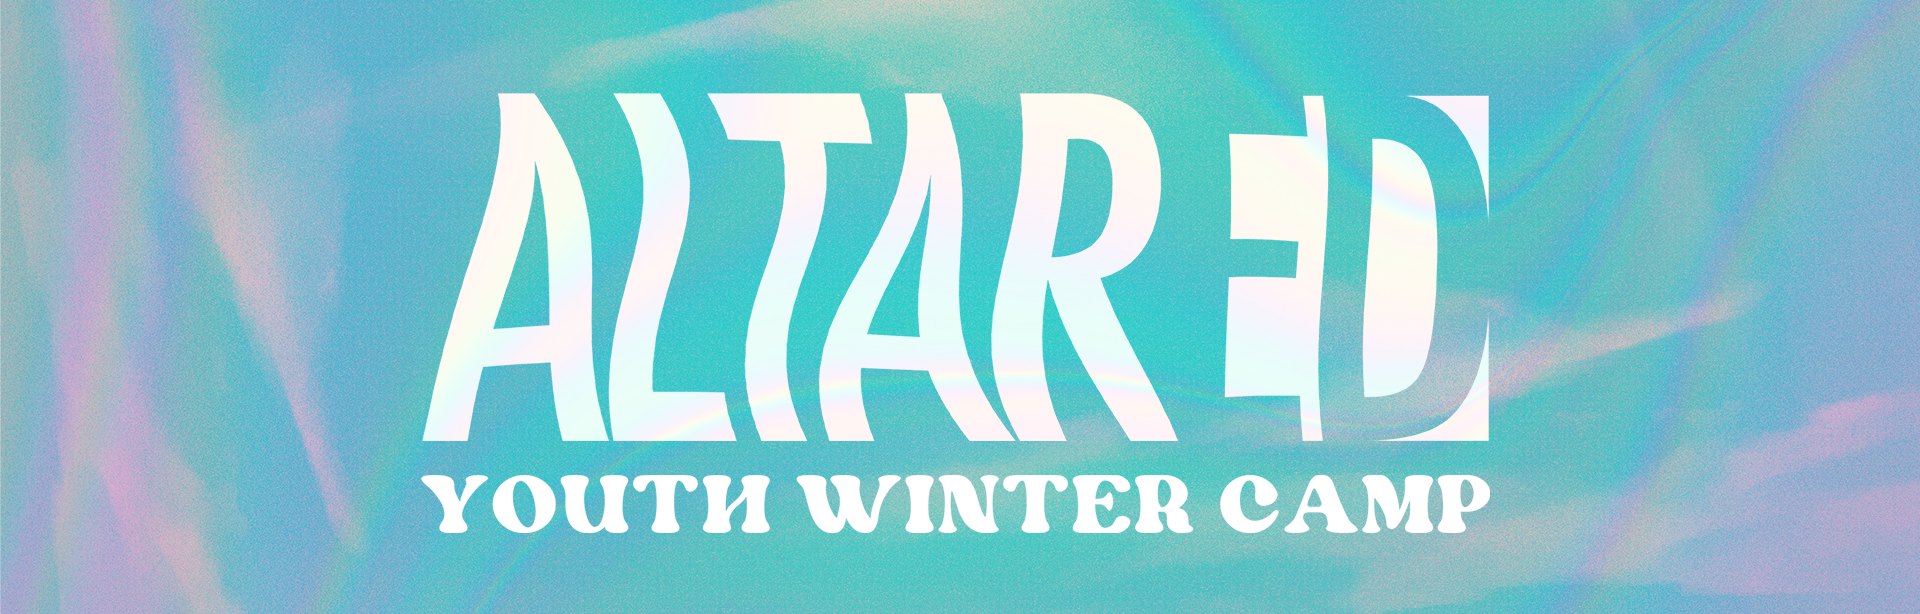 Youth Winter Camp